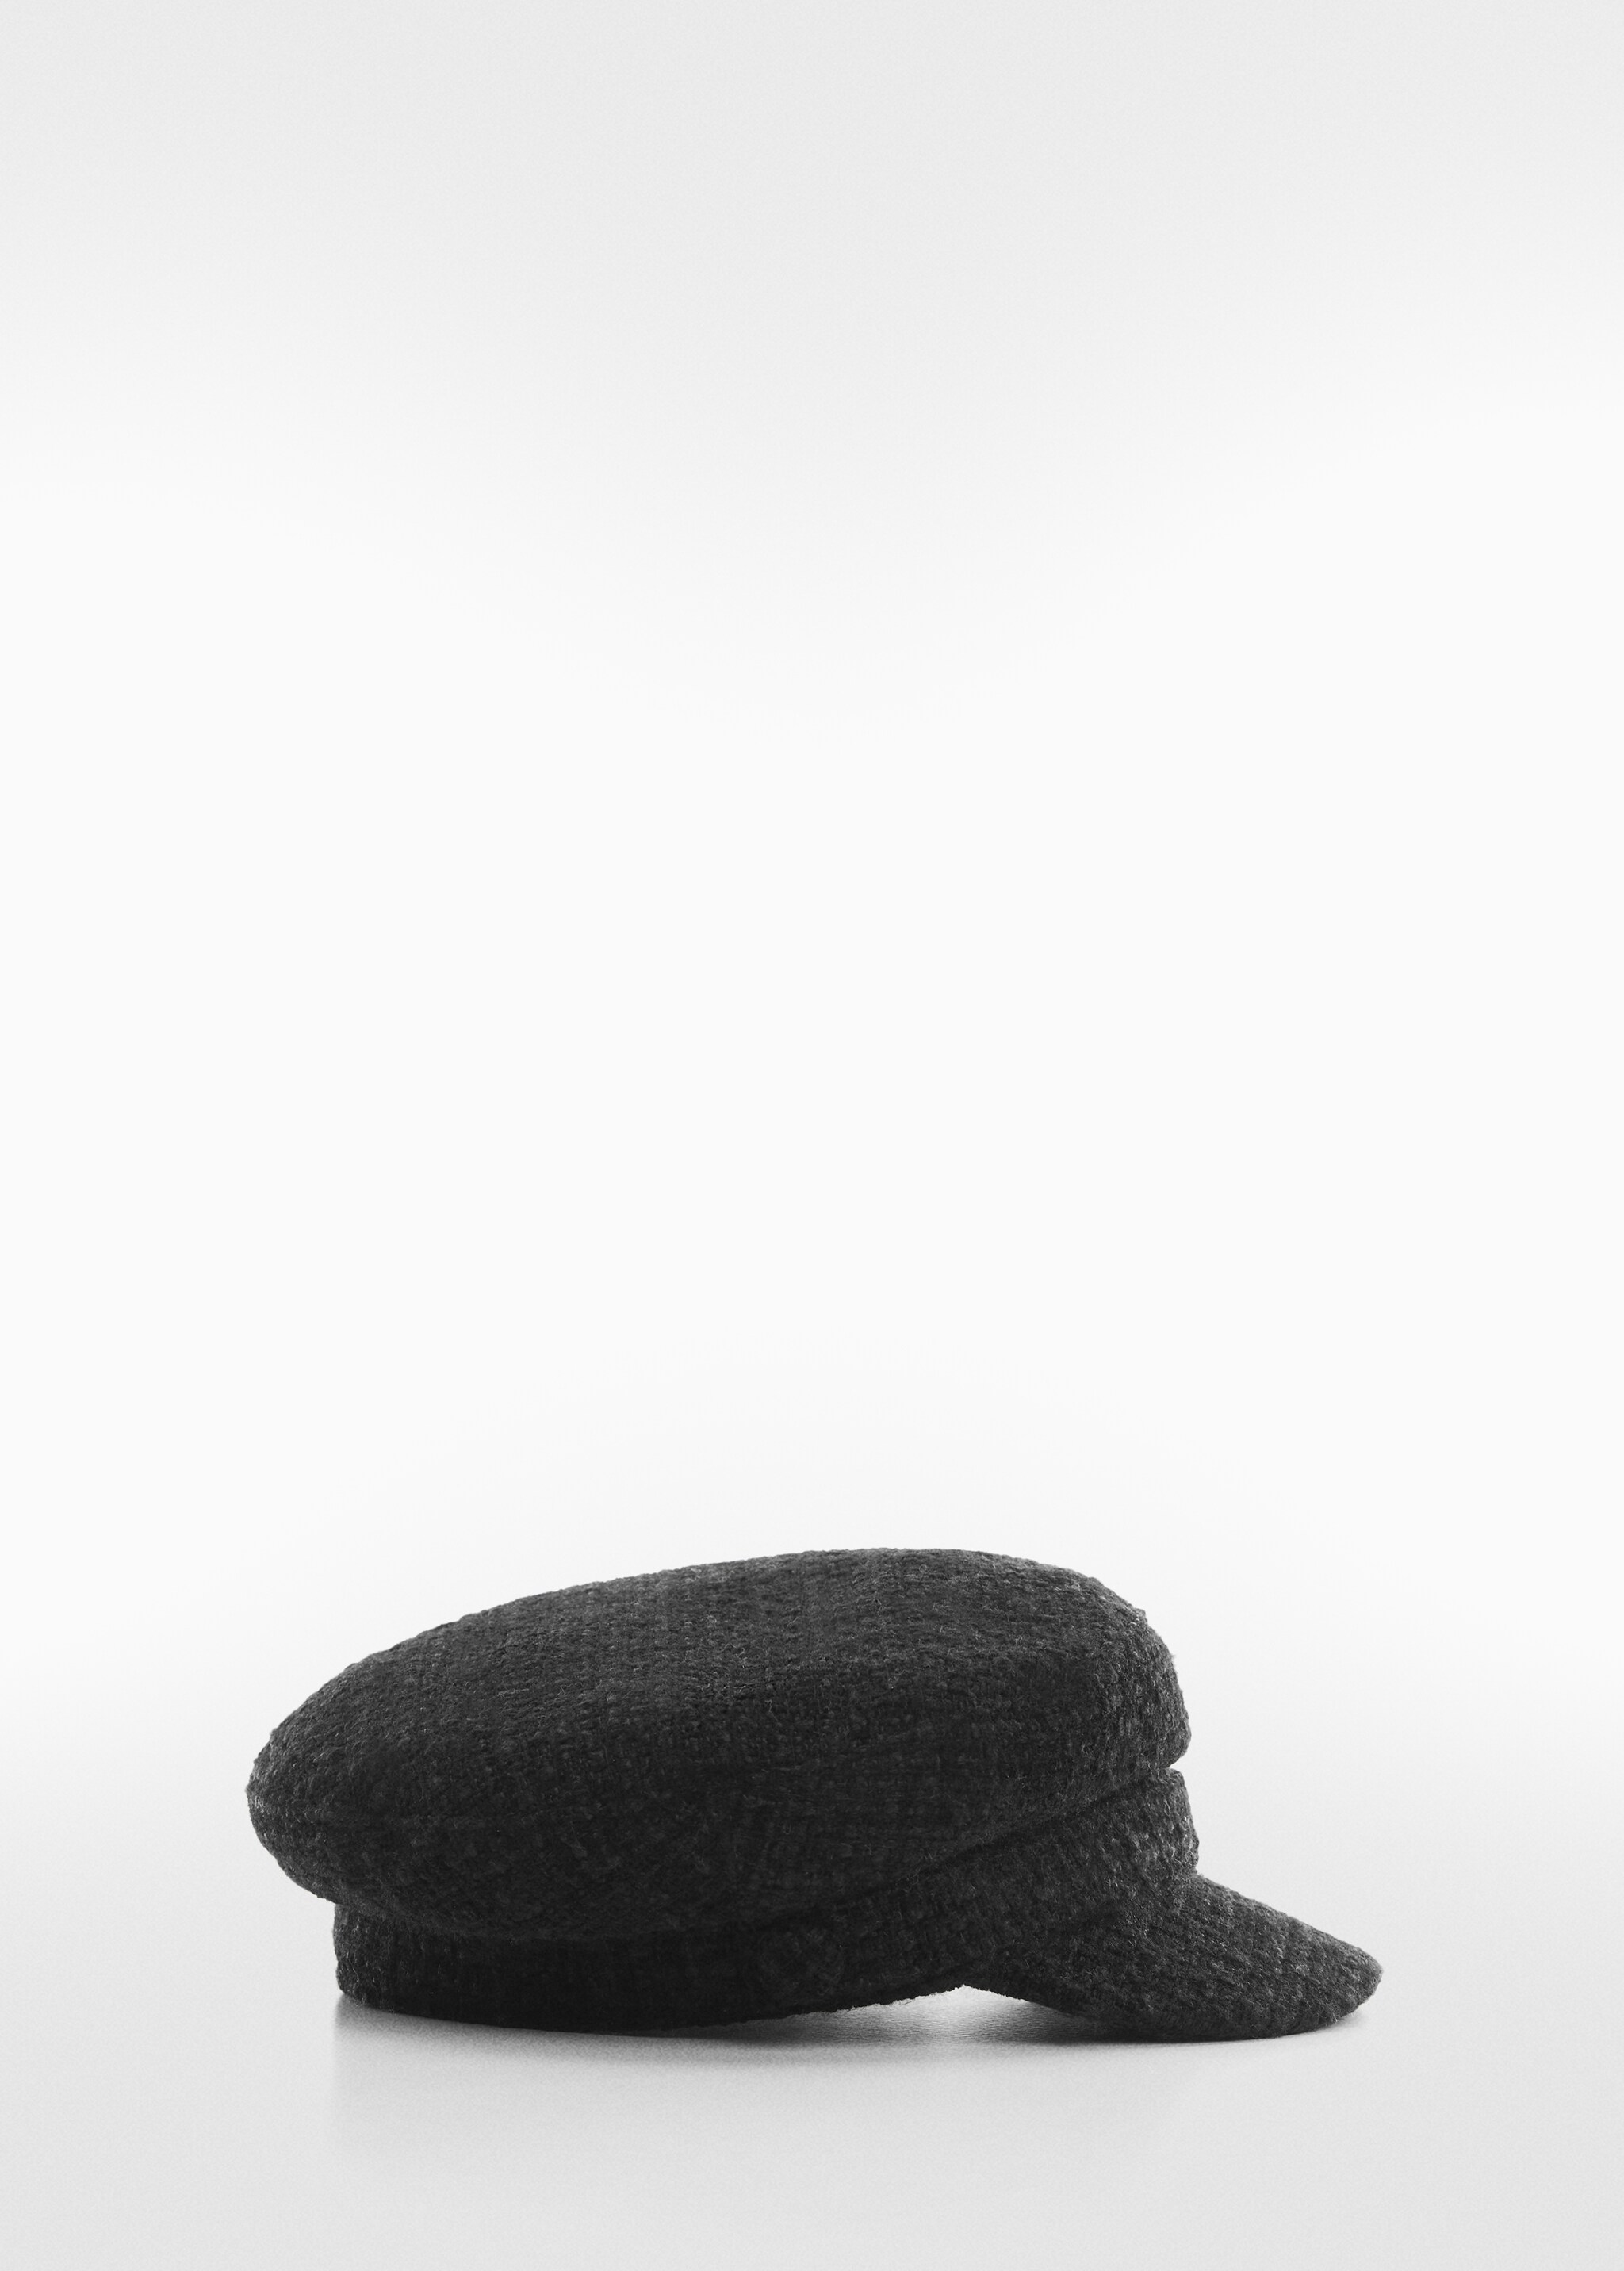 Tweed baker cap - Article without model